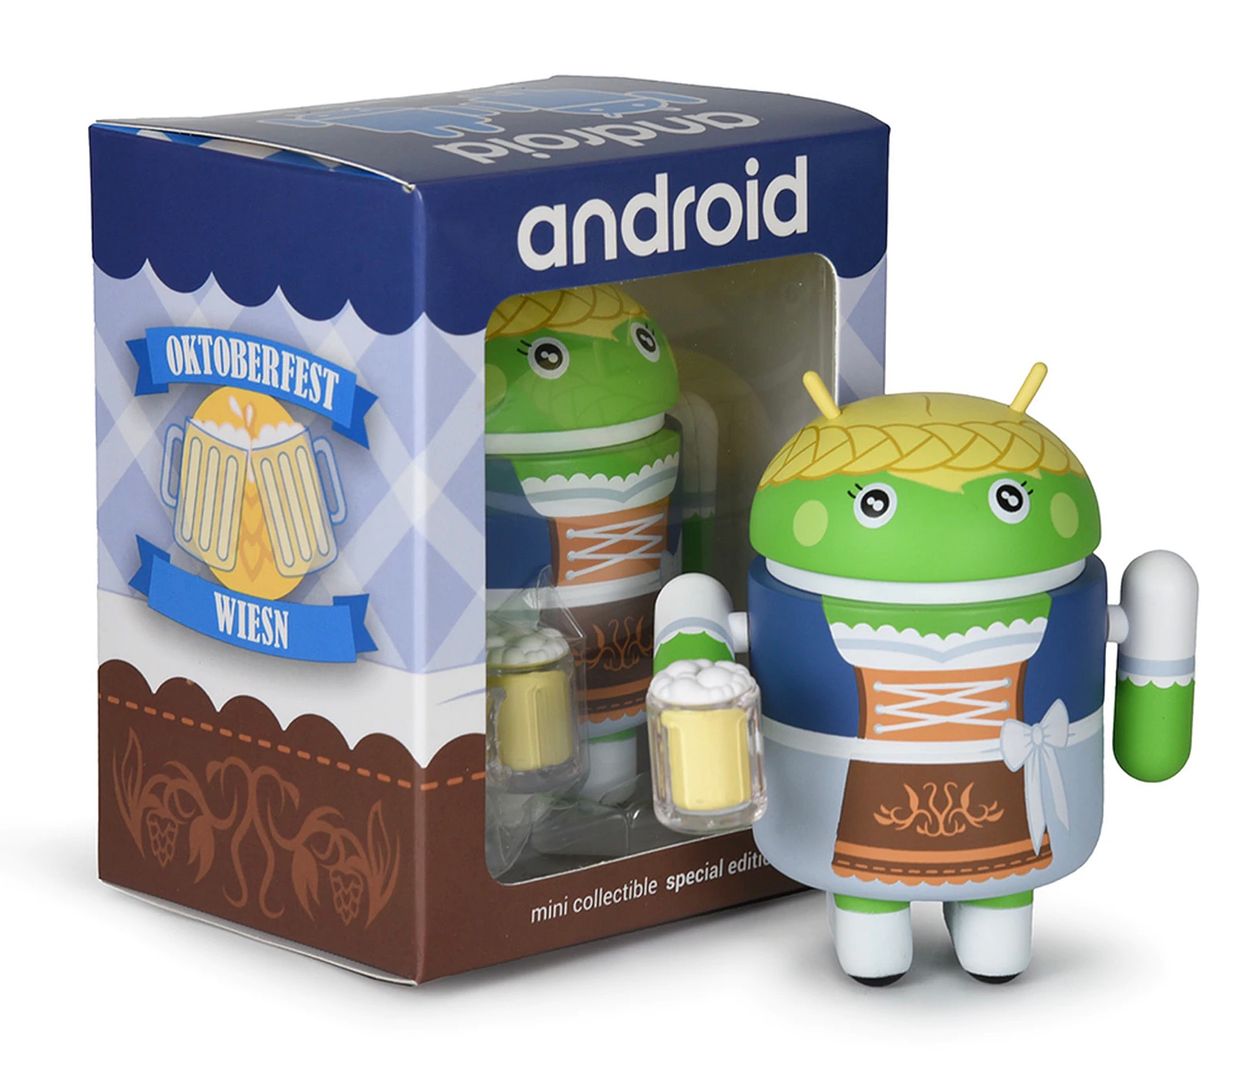 Android, Limited Edition, Vinyl Toys, Andrew Bell, SpankyStokes, Holiday, 2019 Oktoberfest ANDROID edition available now... Cheers